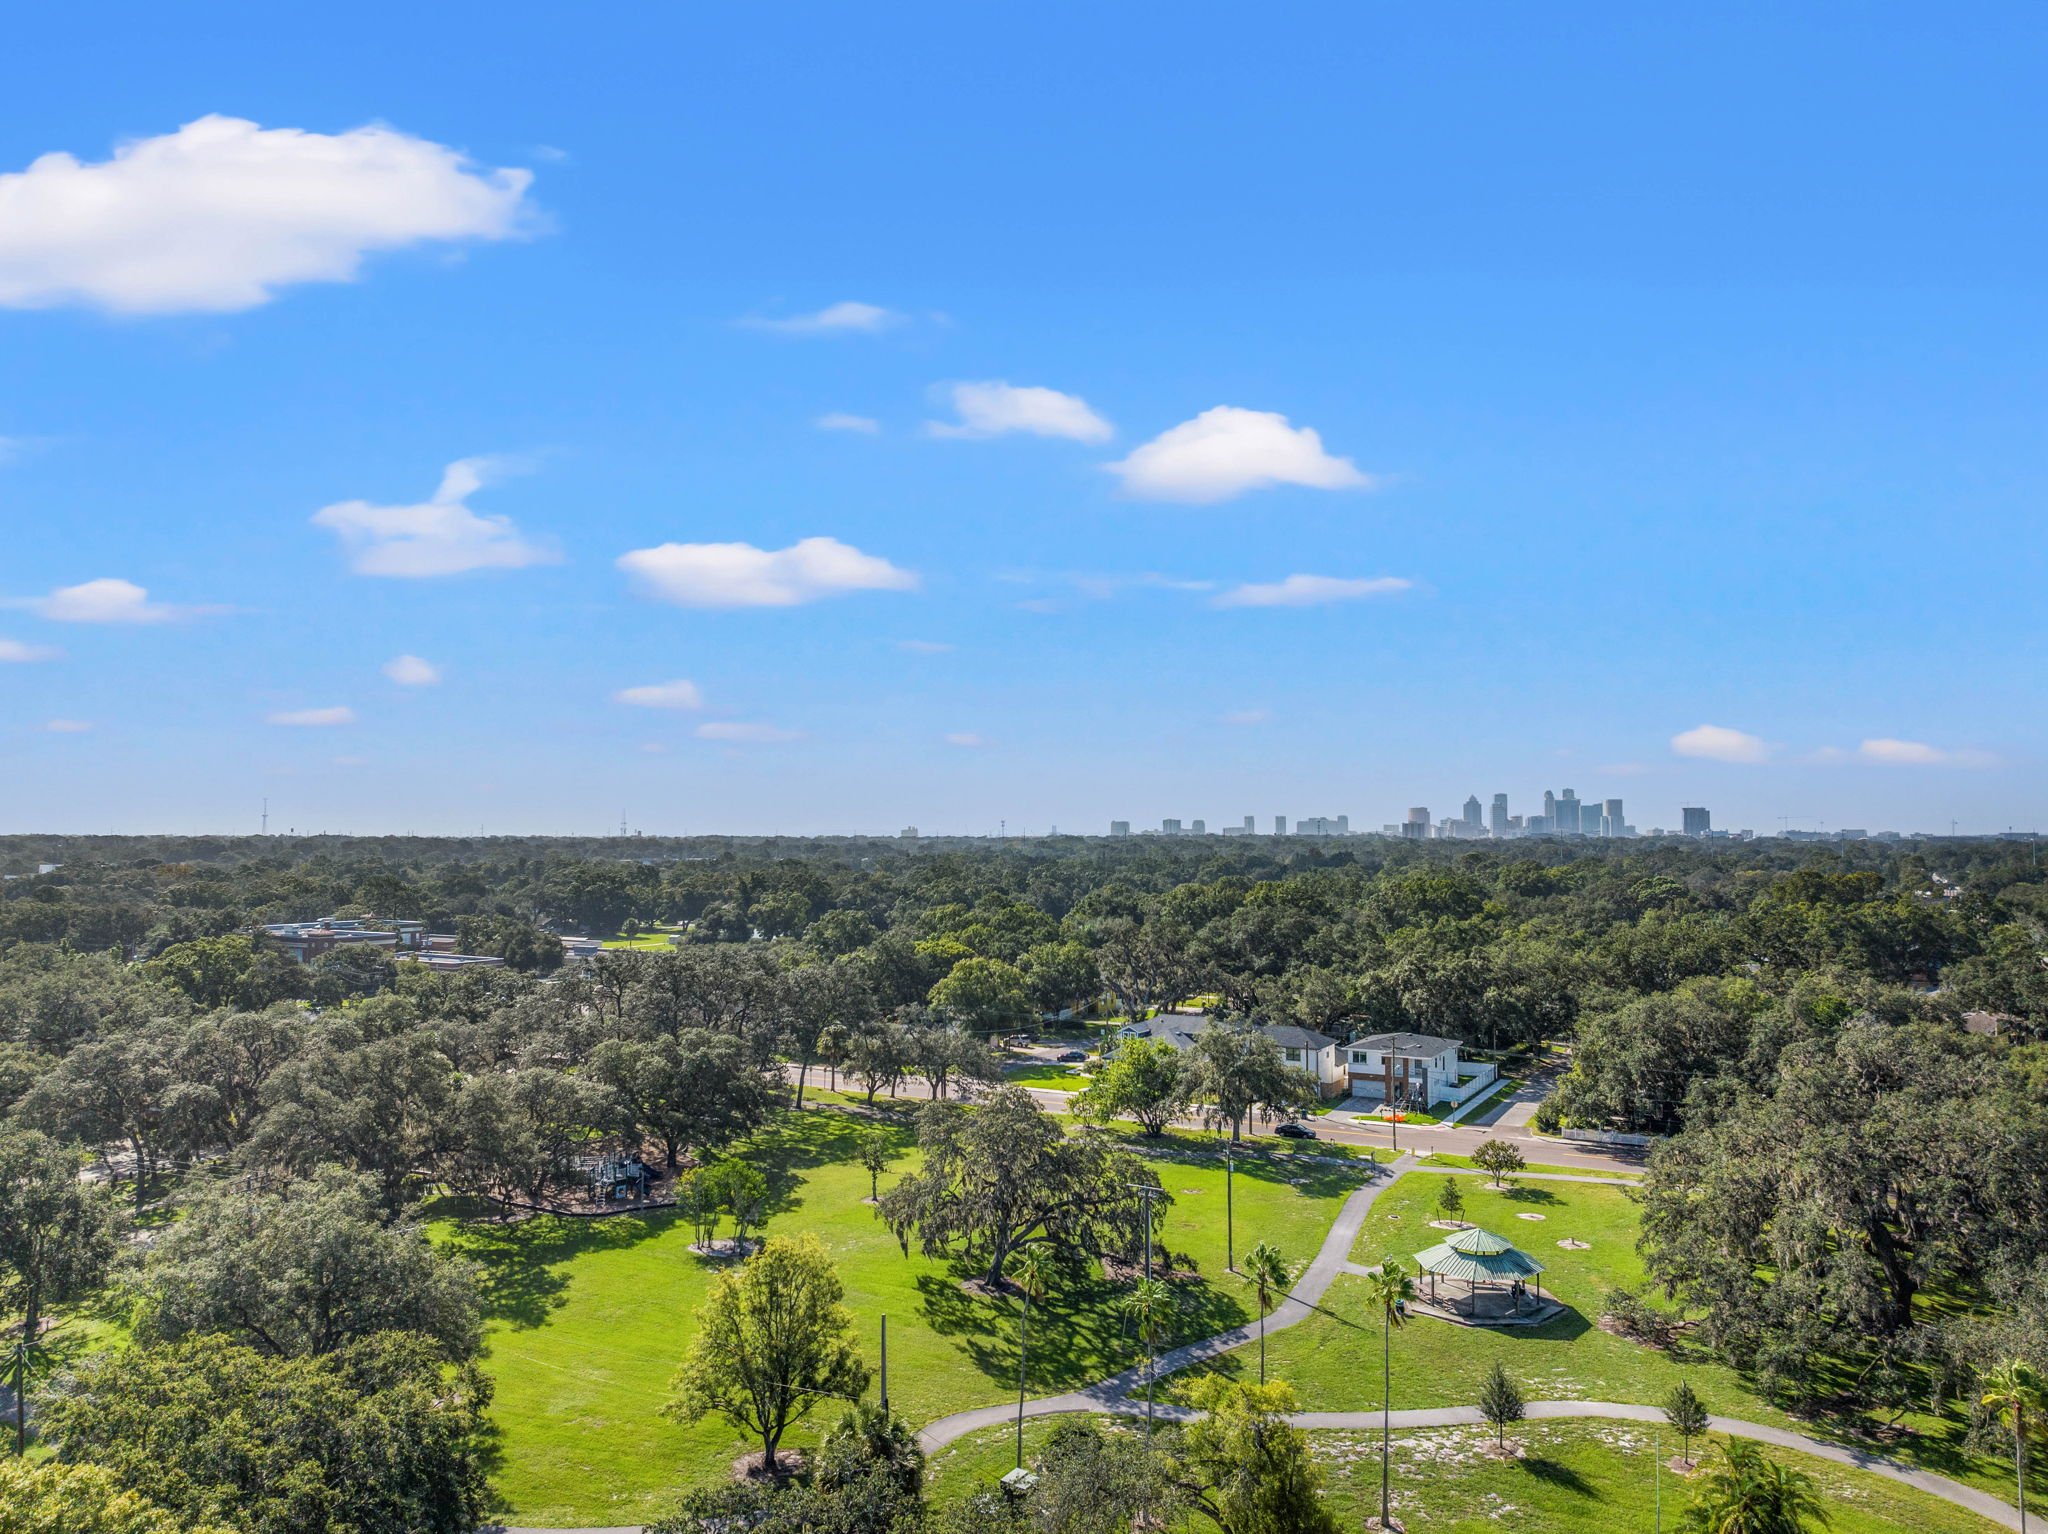 101 W Ida St - Seminole Heights - The Heights - Tampa - The Grimsdale Group - Rivercrest Park toward downtown Tampa.jpg